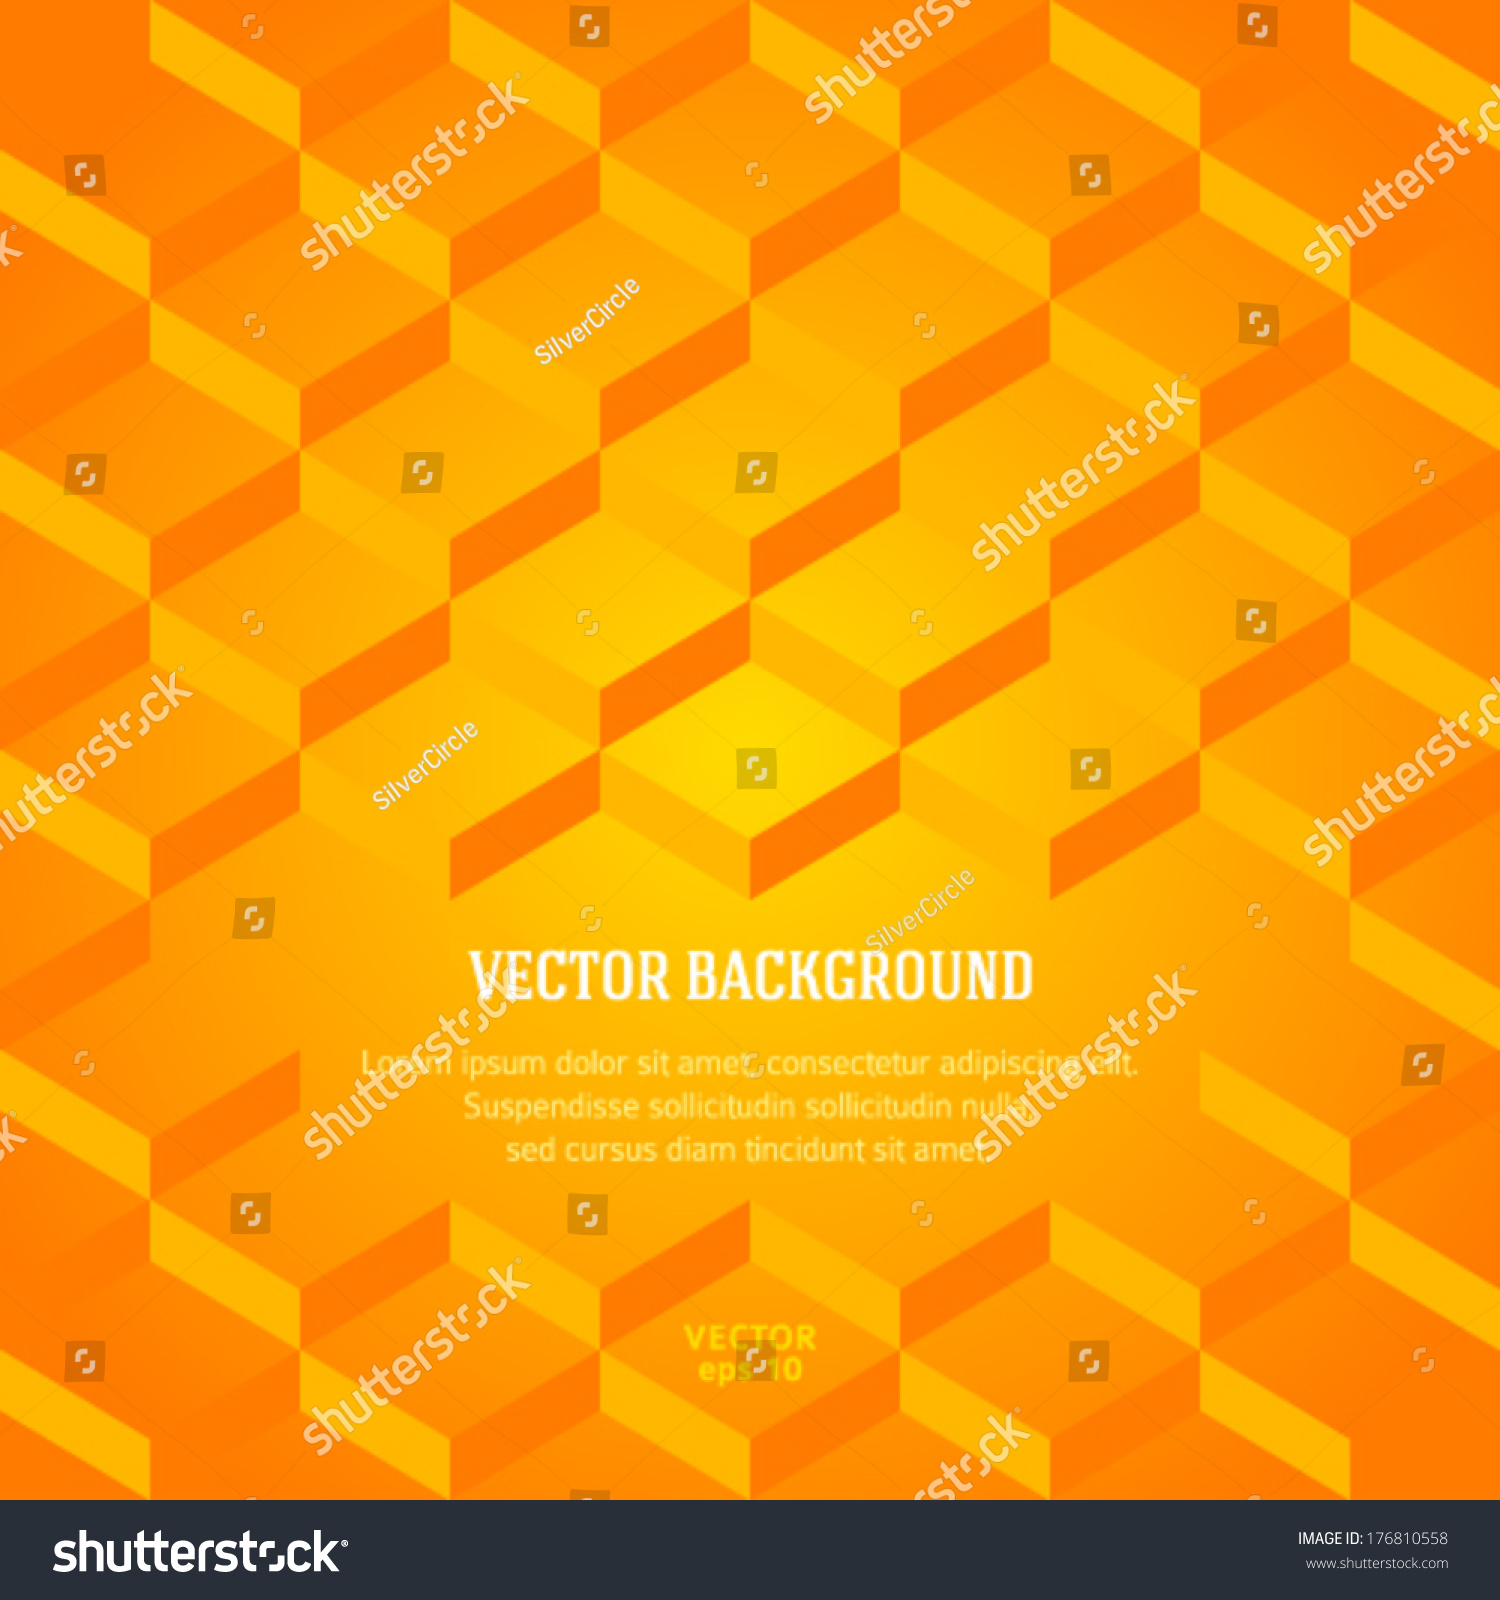 Orange Steps Success Abstract Business Cover Stock Vector HD ...